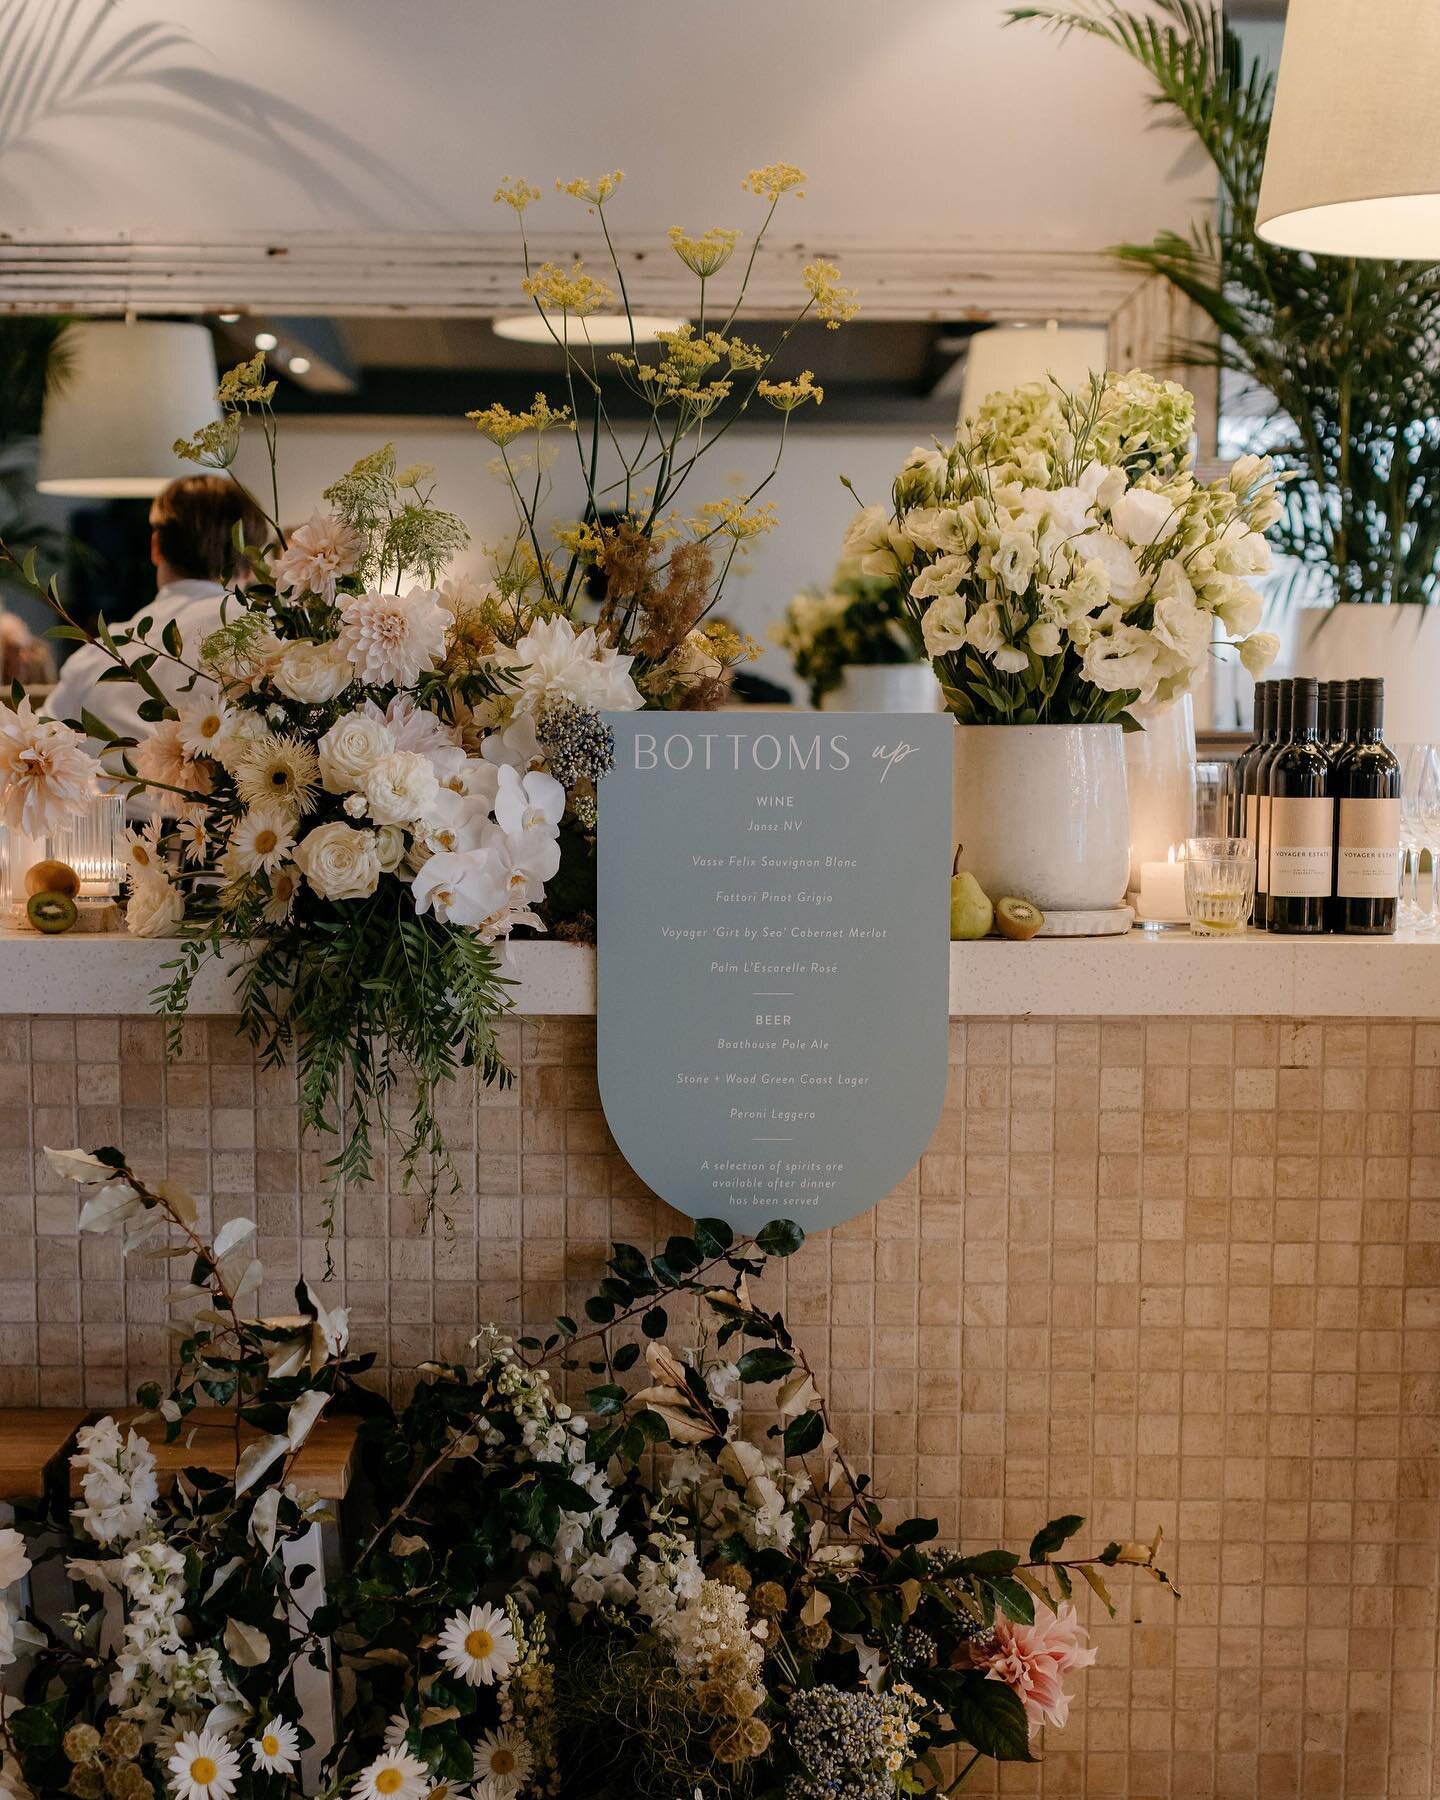 Bottoms up ~ pretty floral styling on the bar at Moby Dicks Whale Beach ✨

Photo @blaisebell